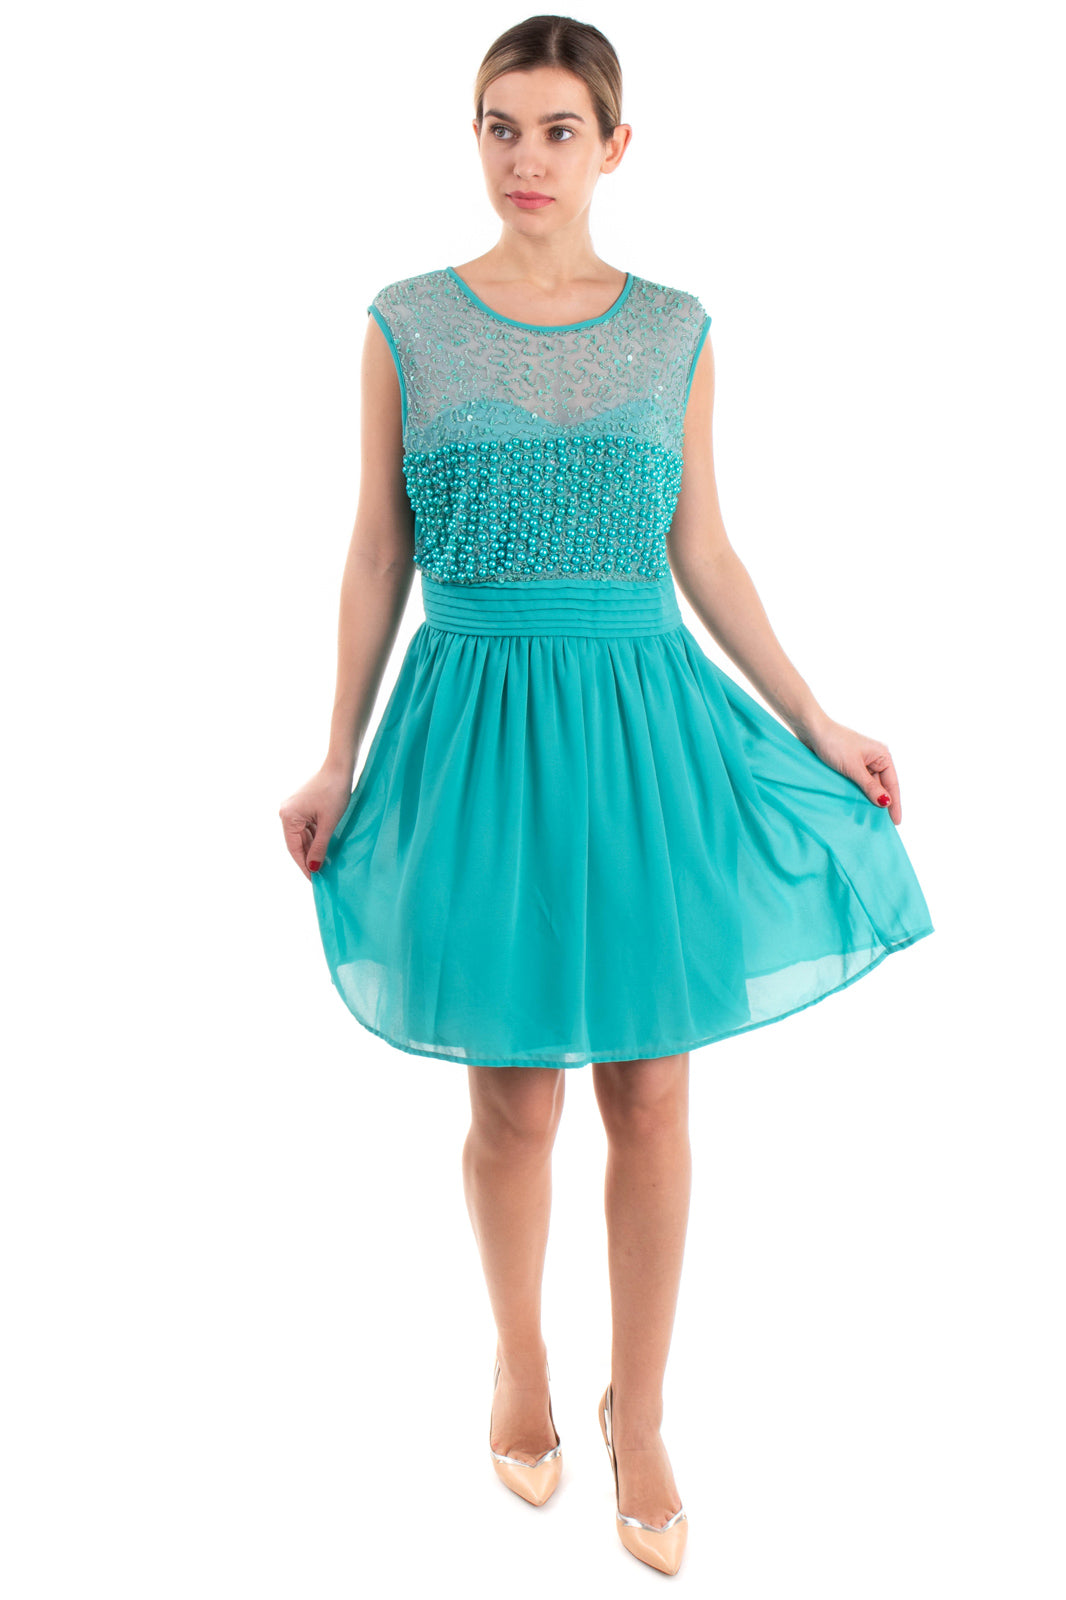 LA KORE Skater Dress Size 3 / M Sequins & Beads Embellished Pleated Round Neck gallery main photo